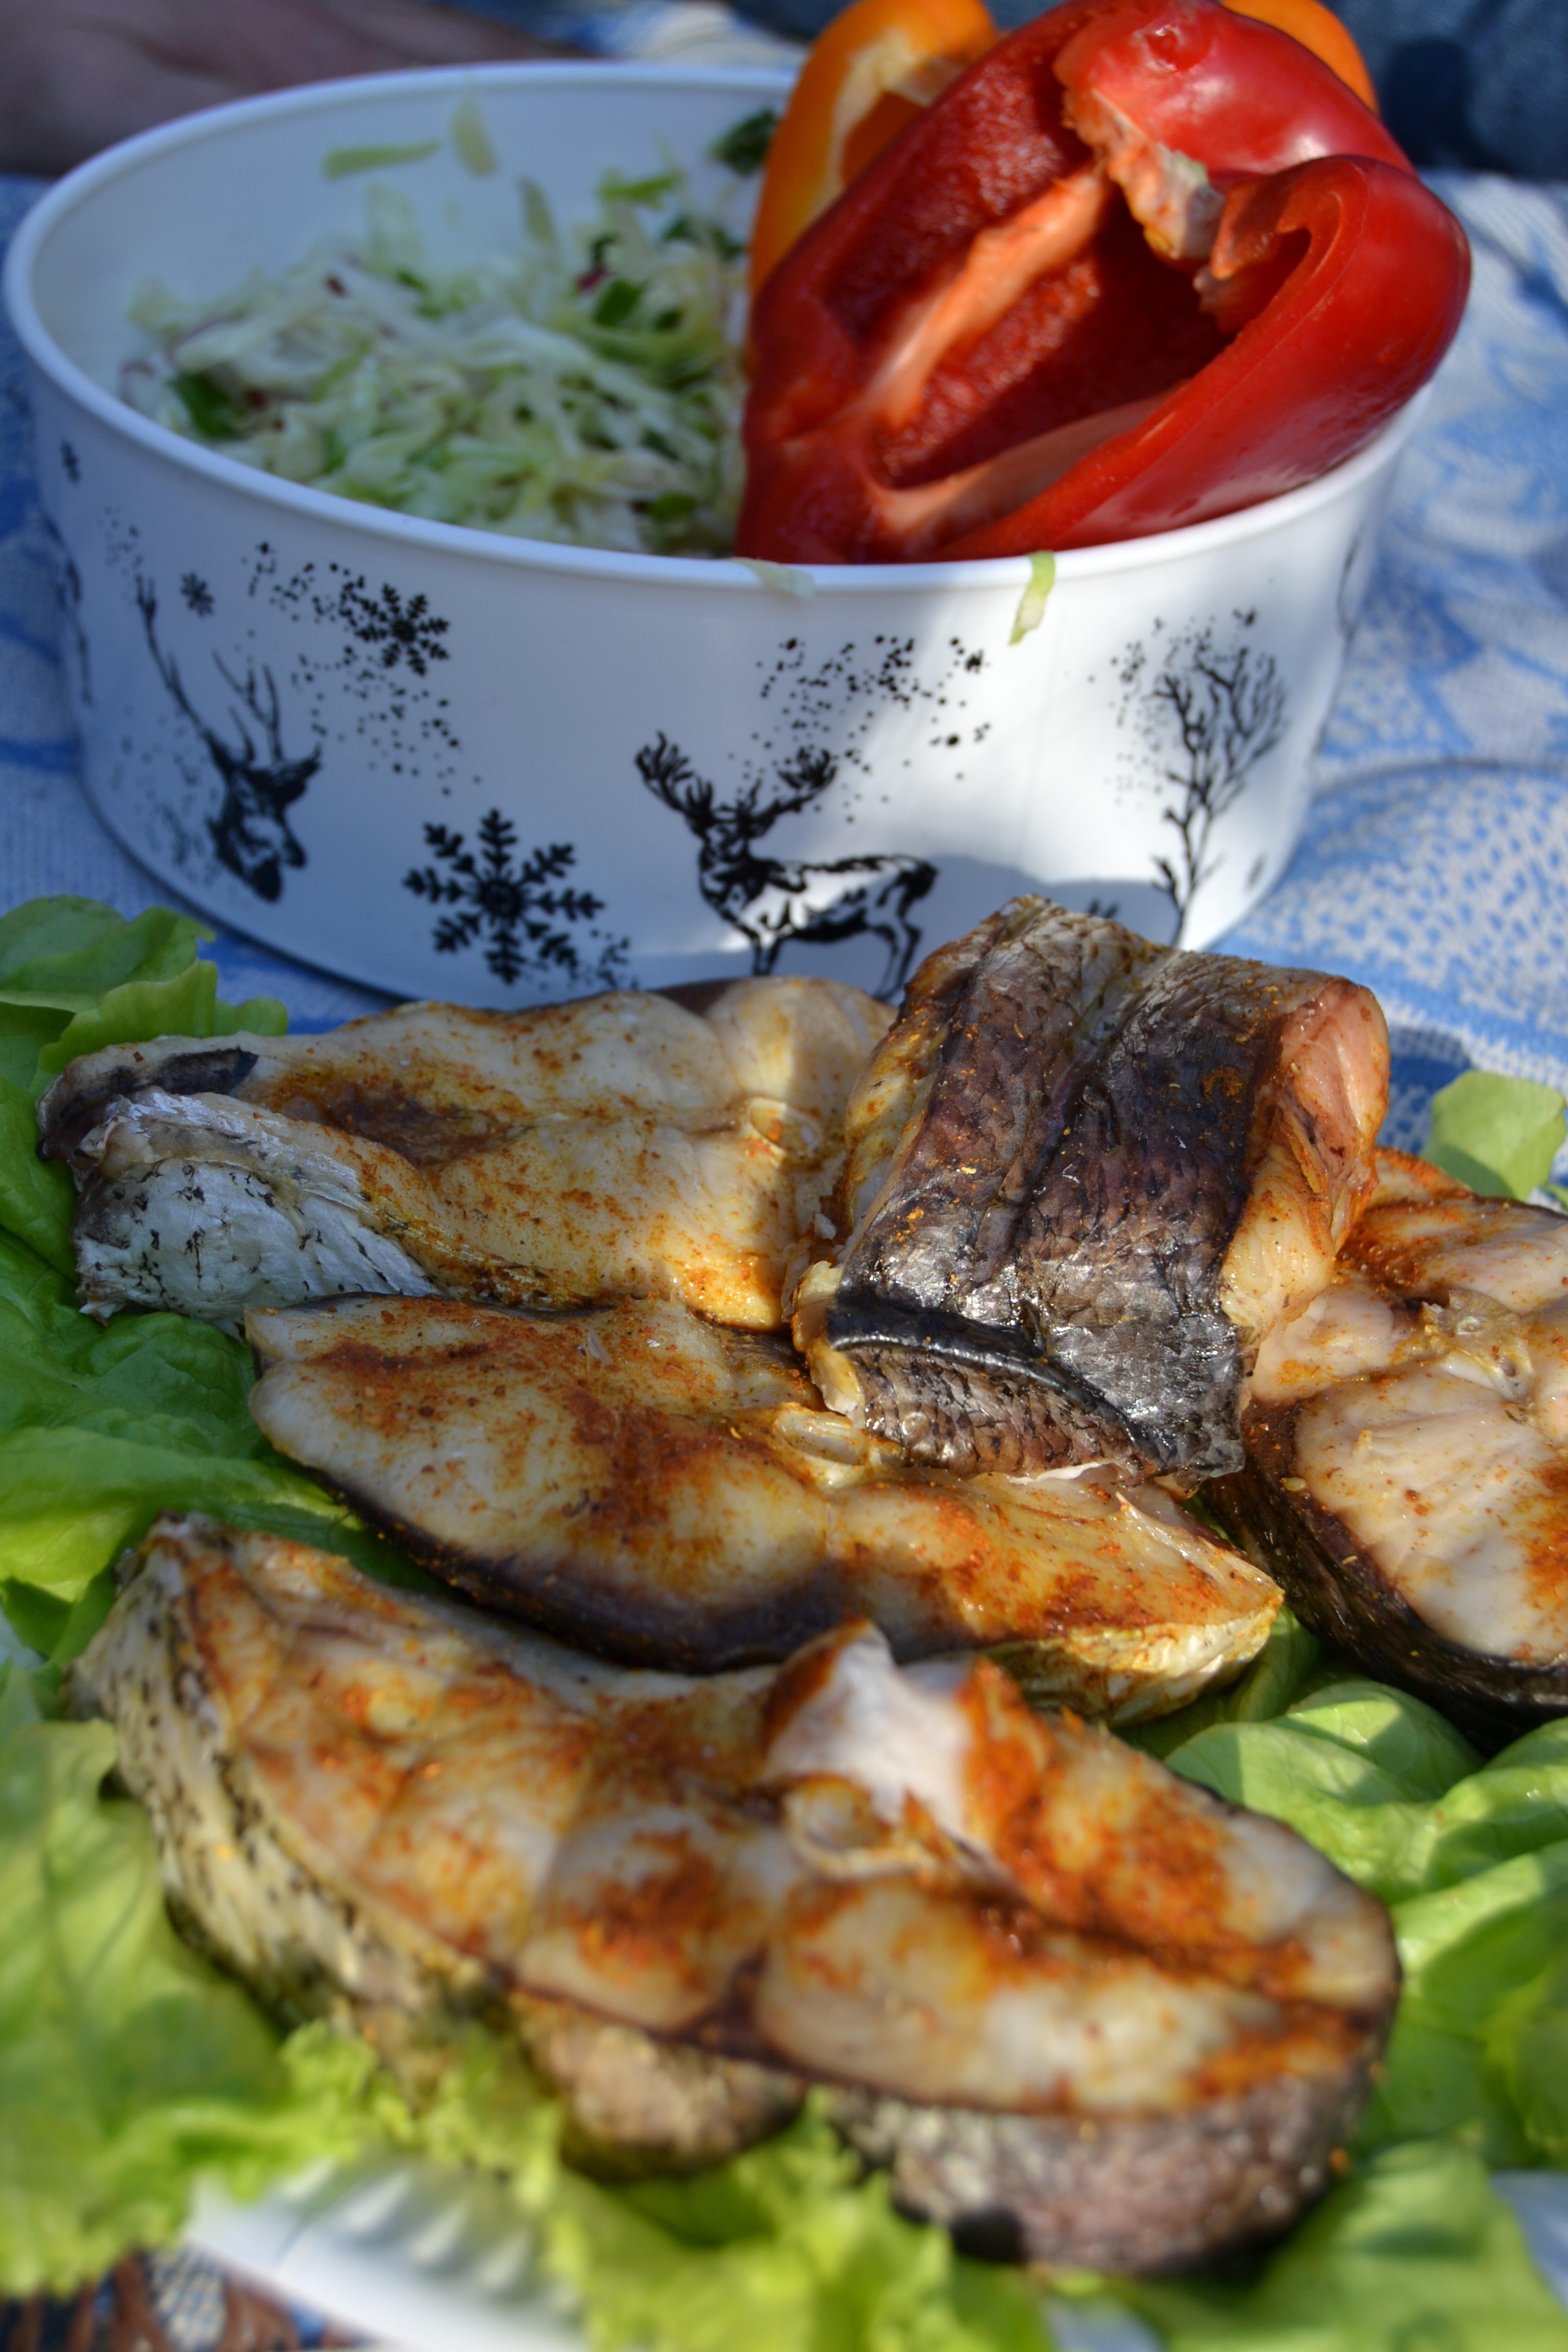 fried fish with lettuce and red pepper